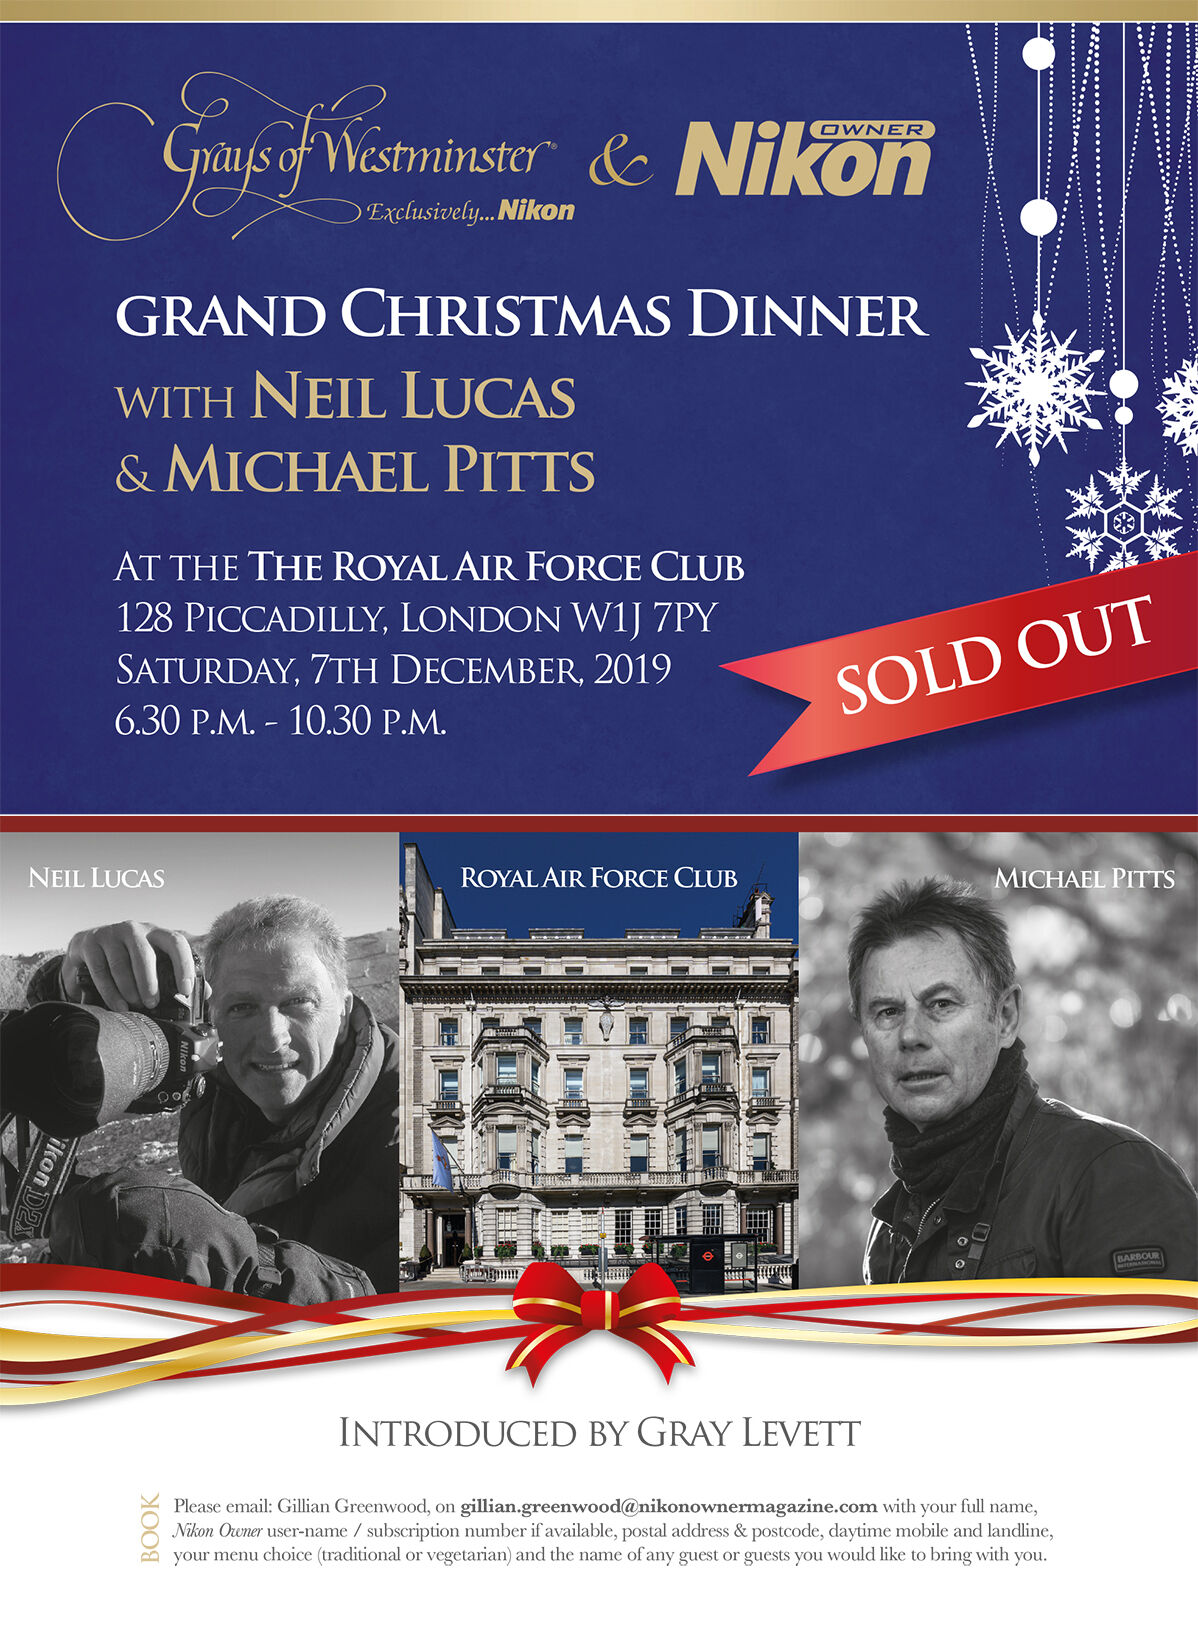 Grand Christmas Dinner with Neil Lucas & Michael Pitts